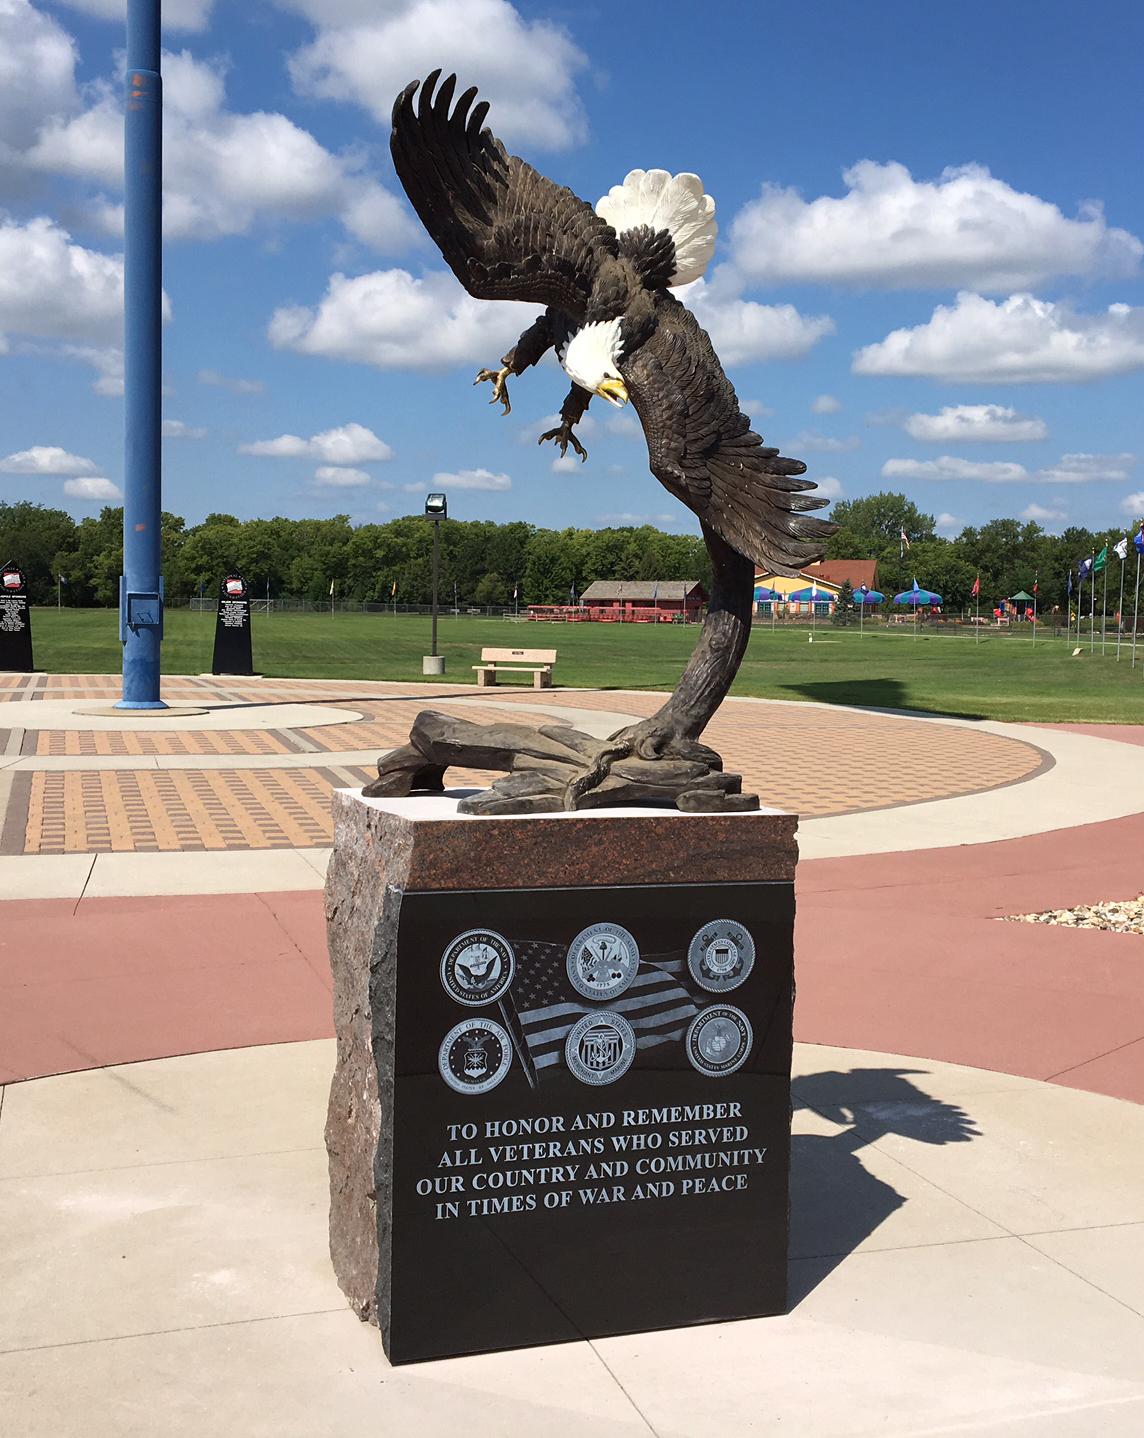 Our lost-wax bronze eagle statues are stunning additions to our beloved bronze patriotic collection. An eagle naturally makes one think of freedom and patriotism because of their connection to our country and soldiers. Our array of bronze eagle